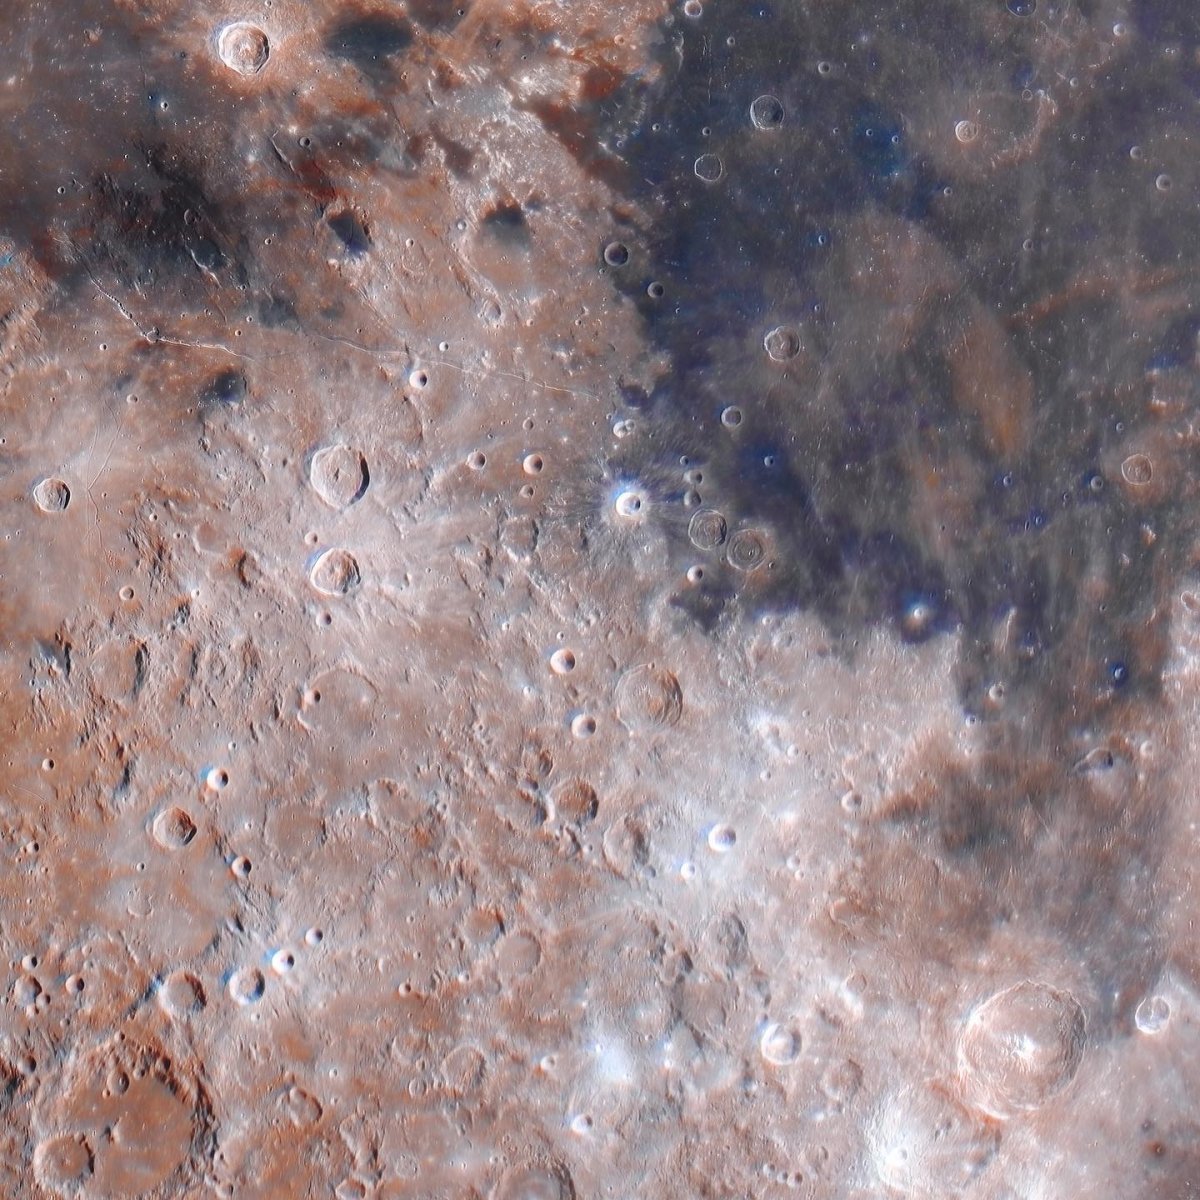 New highly detailed photos of the moon taken #3